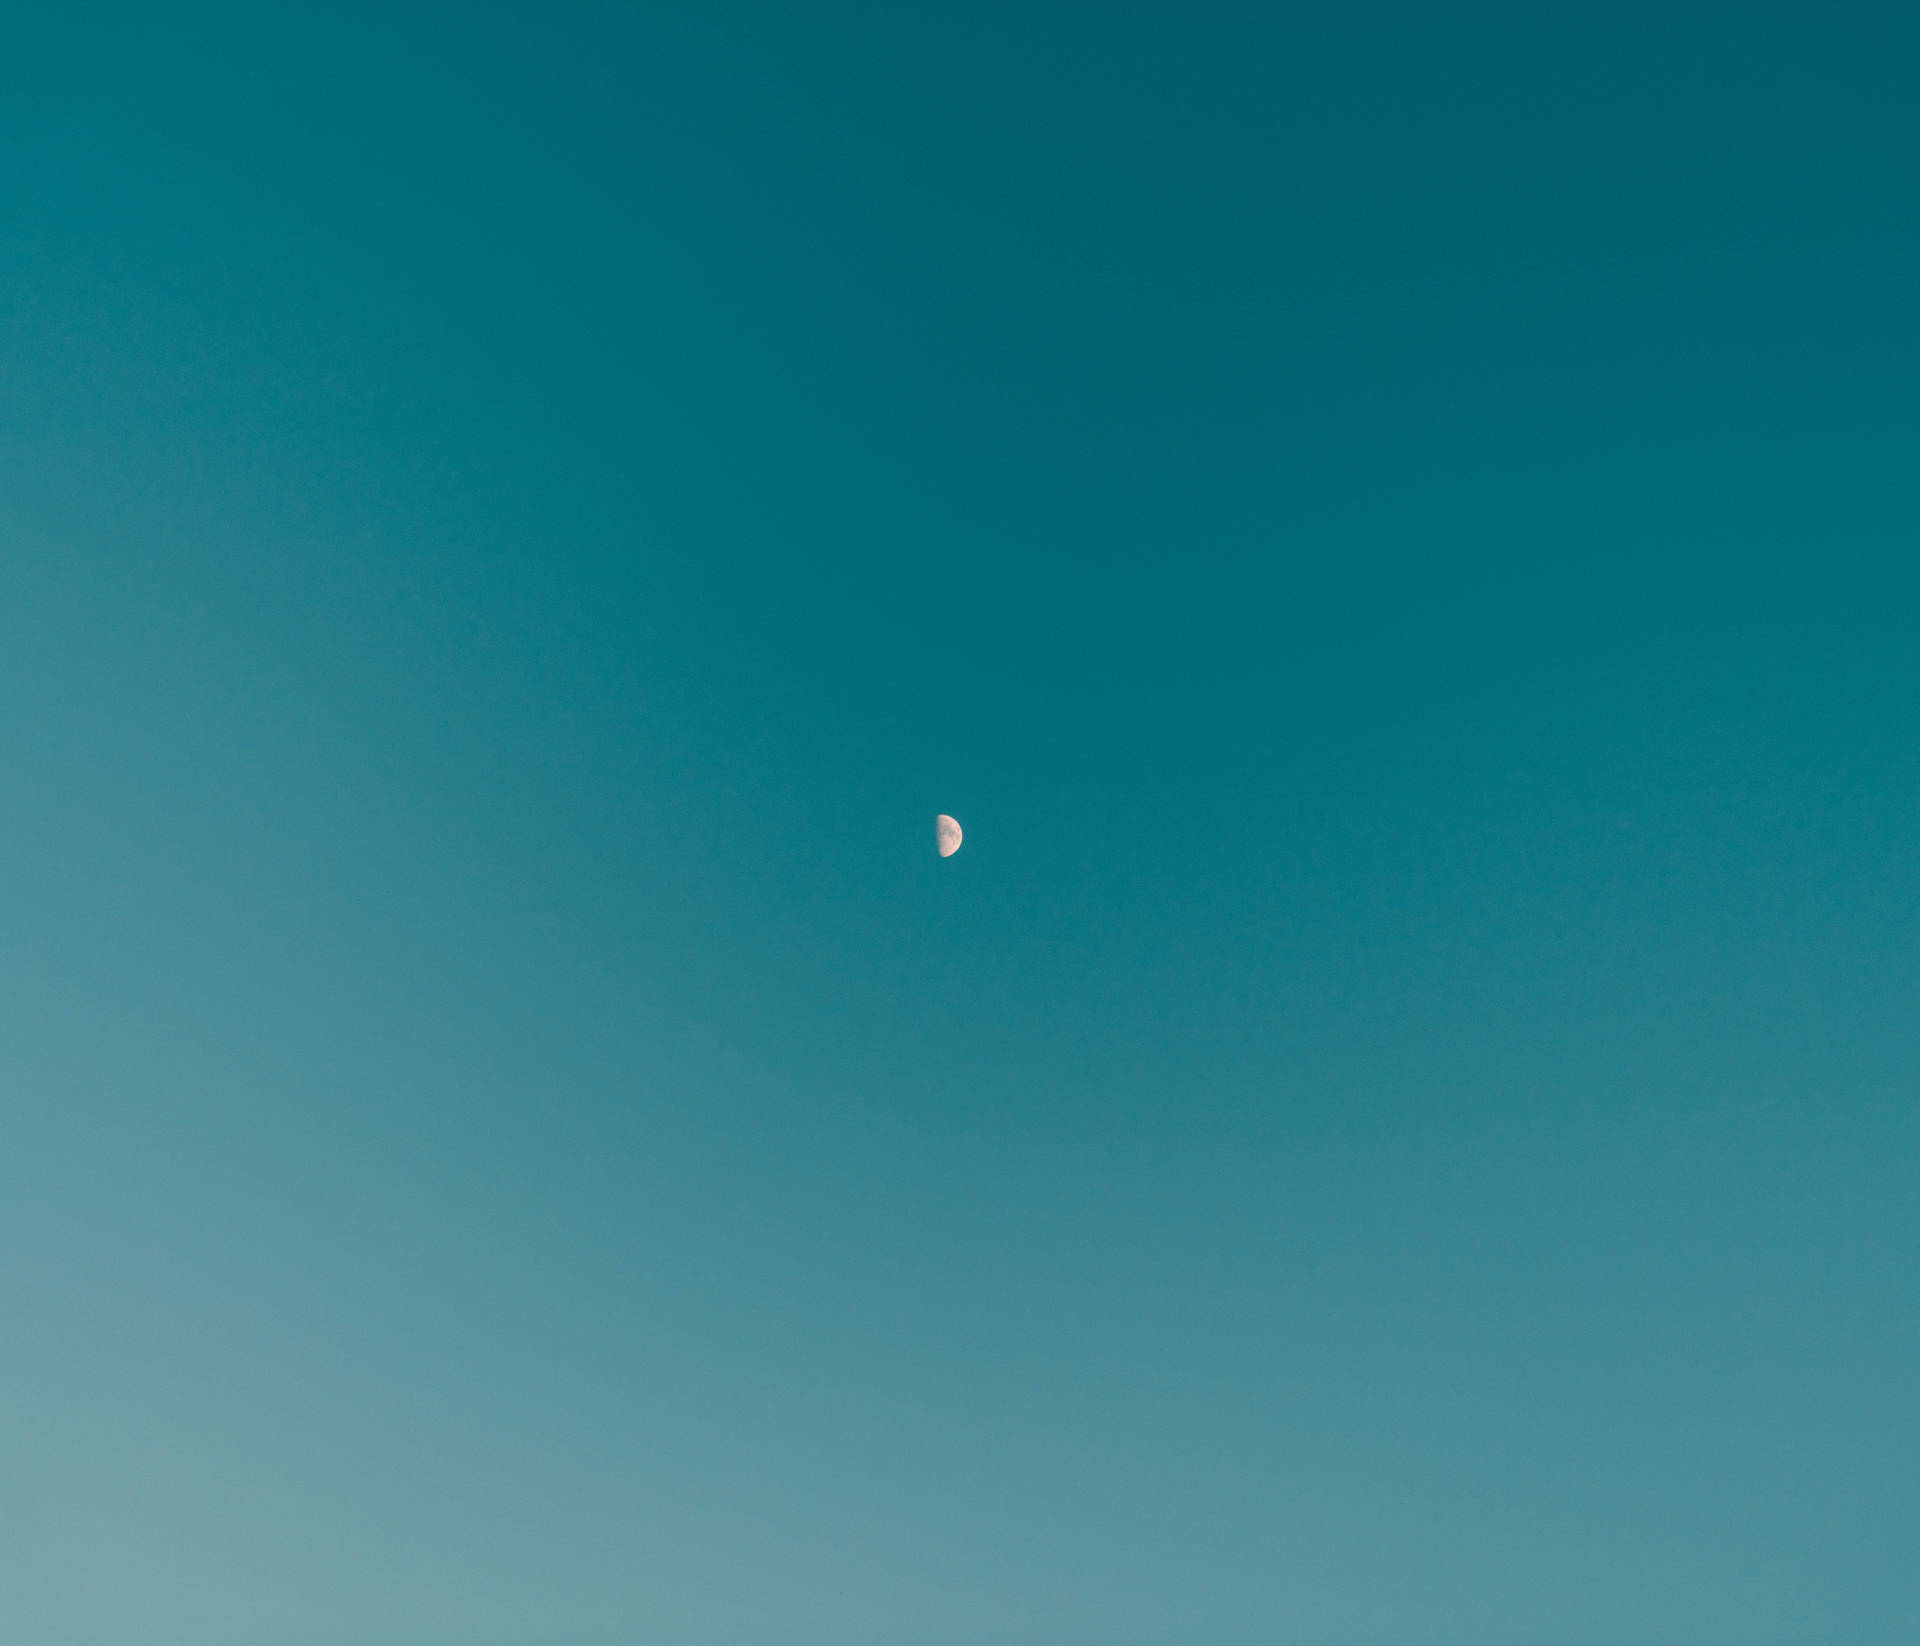 6188X5304 Teal Wallpaper and Background